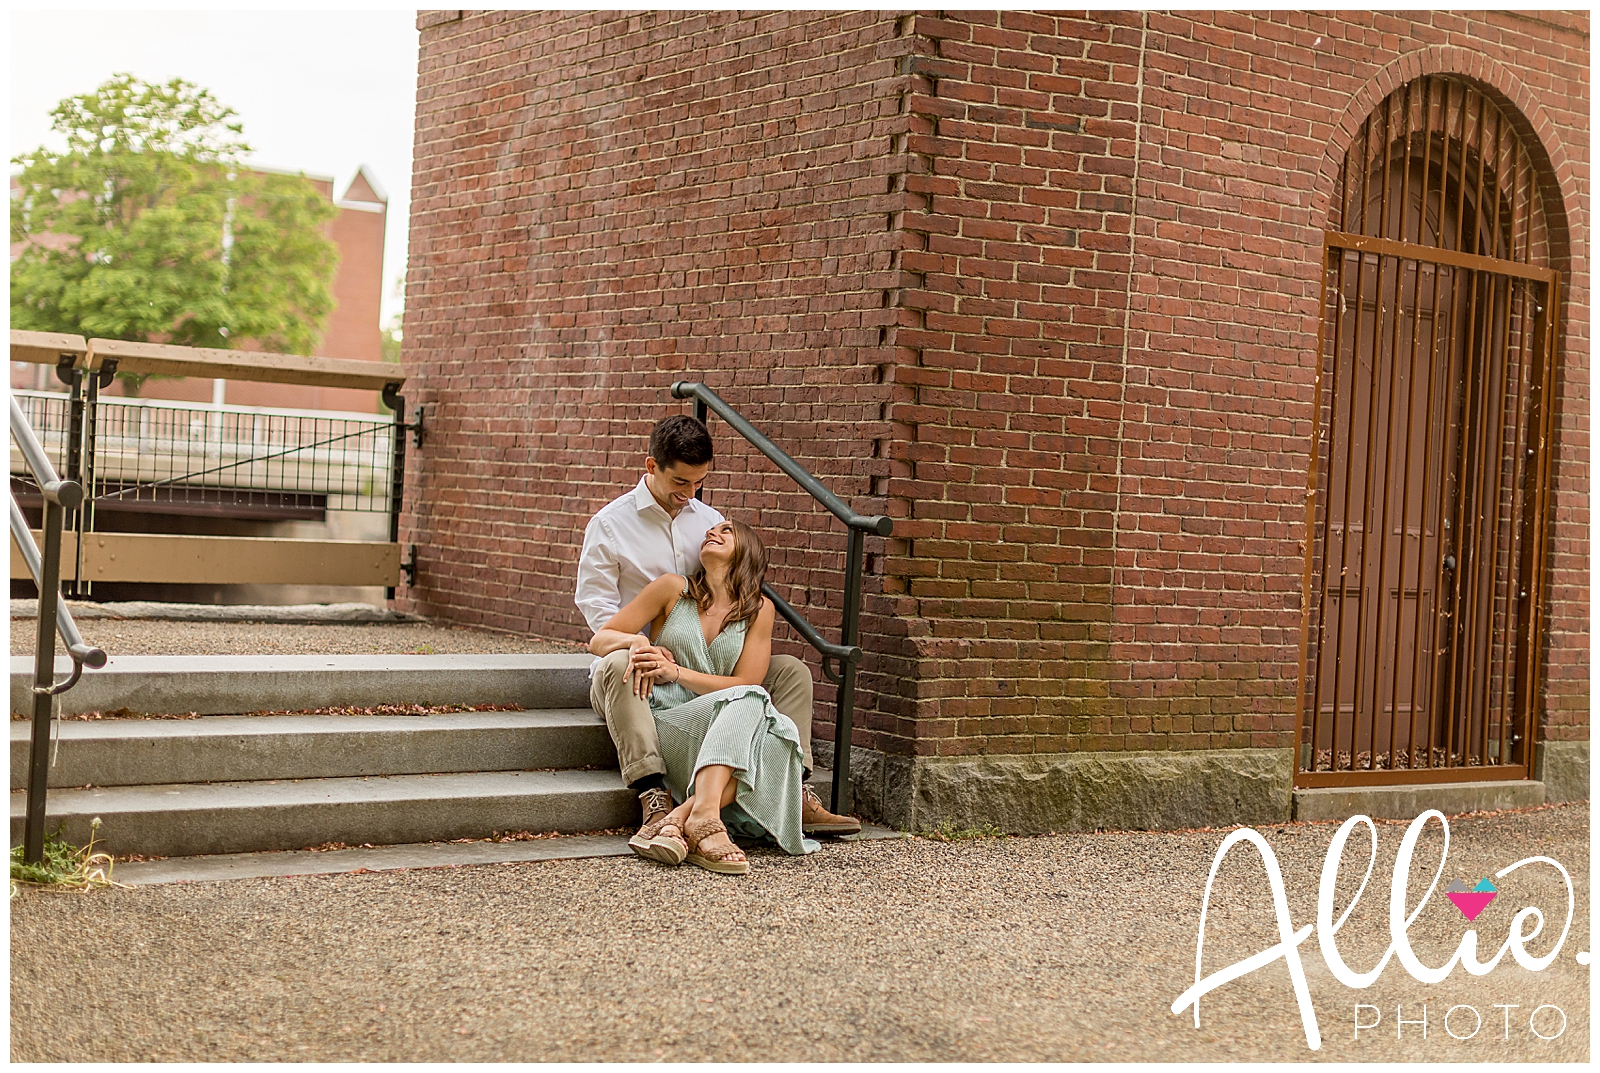 downtown lowell ma engagement photo shoot with brick and historical architecture